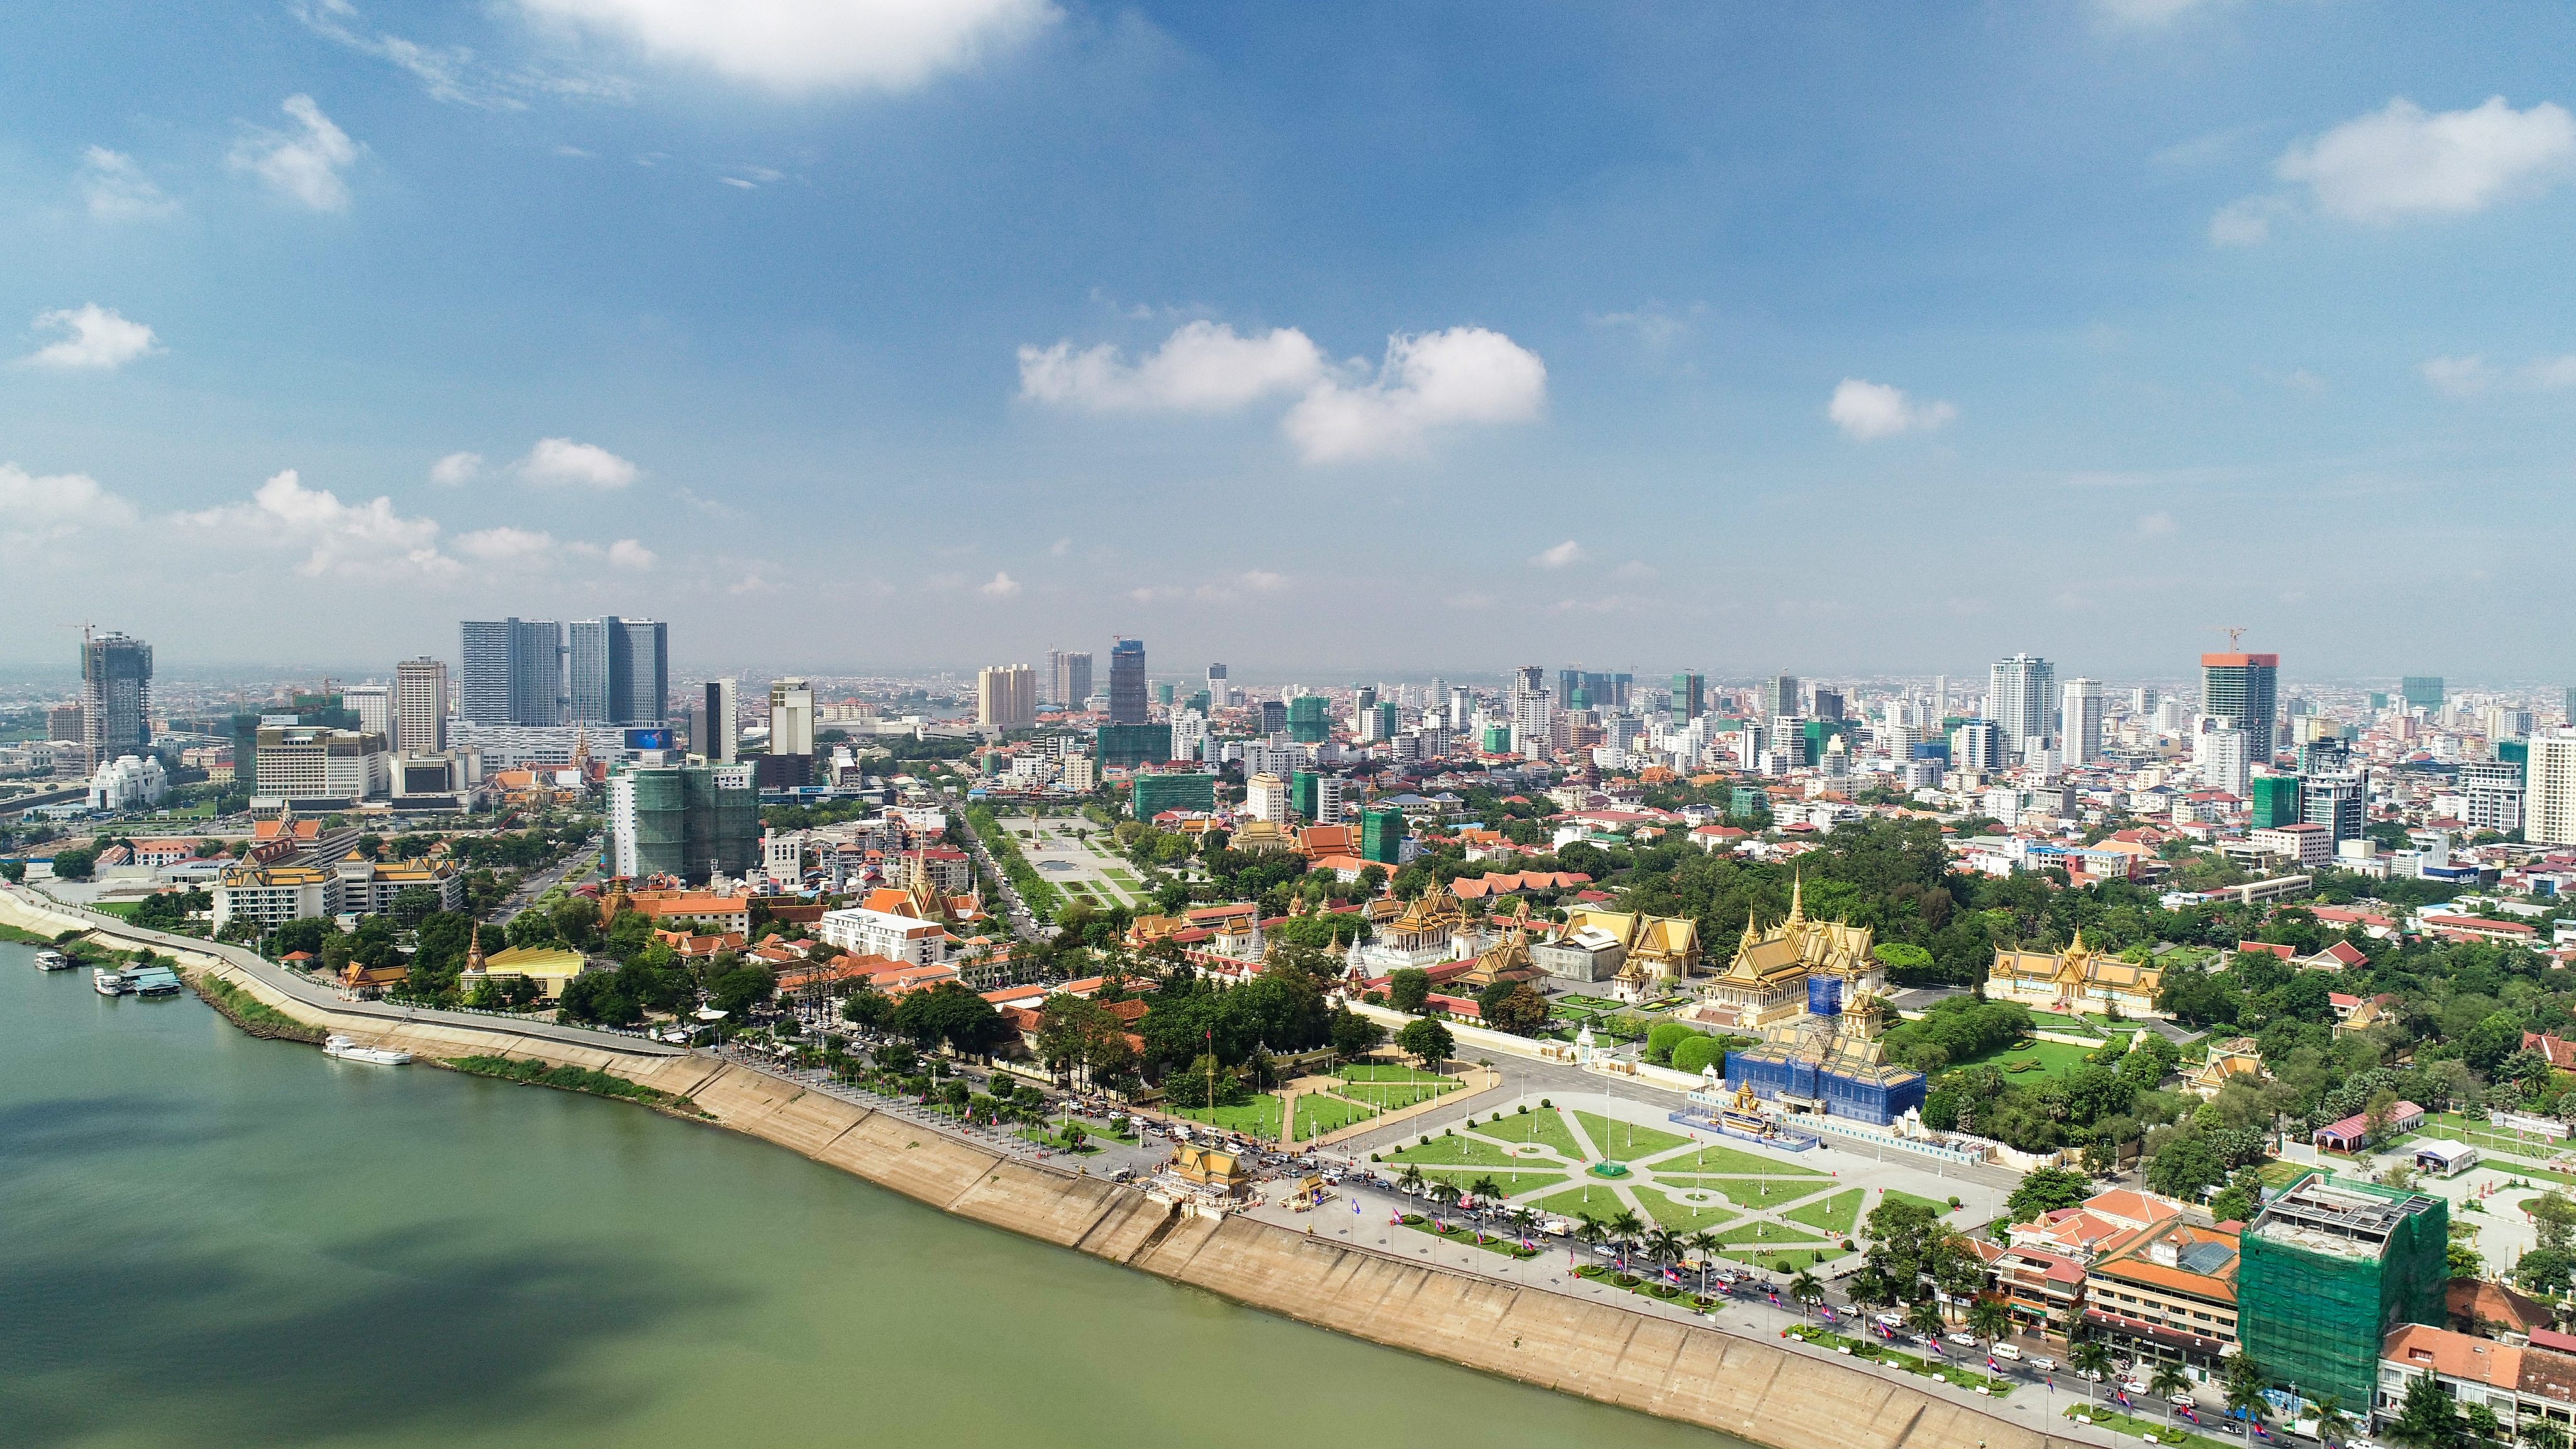 Cambodia is expected to see rising demand from international property investors ahead of the Southeast Asian Games next year. Photo: realestate.com.kh 